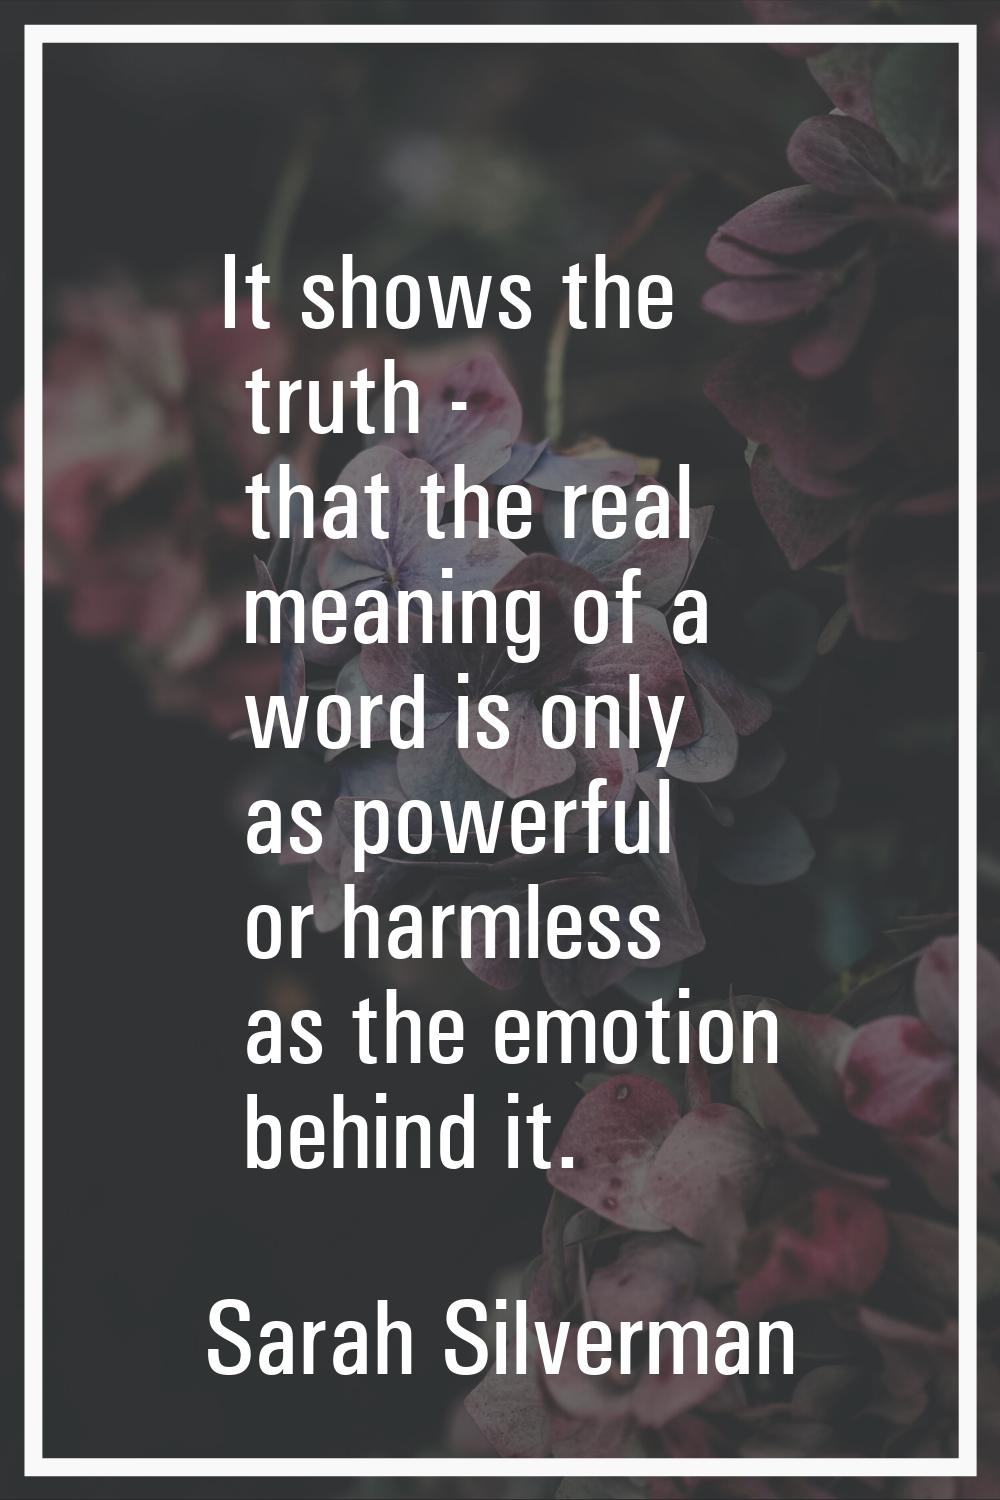 It shows the truth - that the real meaning of a word is only as powerful or harmless as the emotion